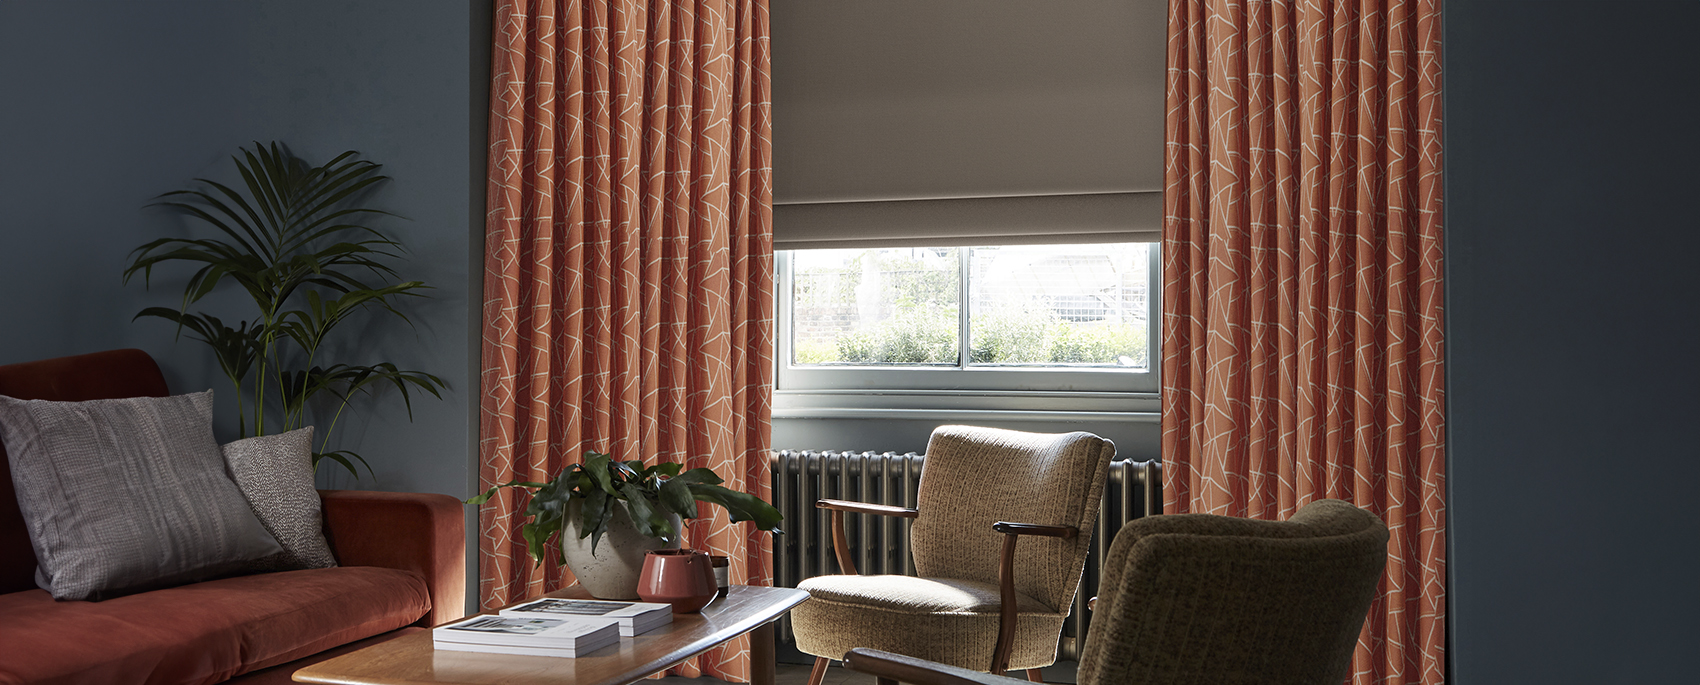 sitting-room-blinds-and-curtains-blinds4less-london